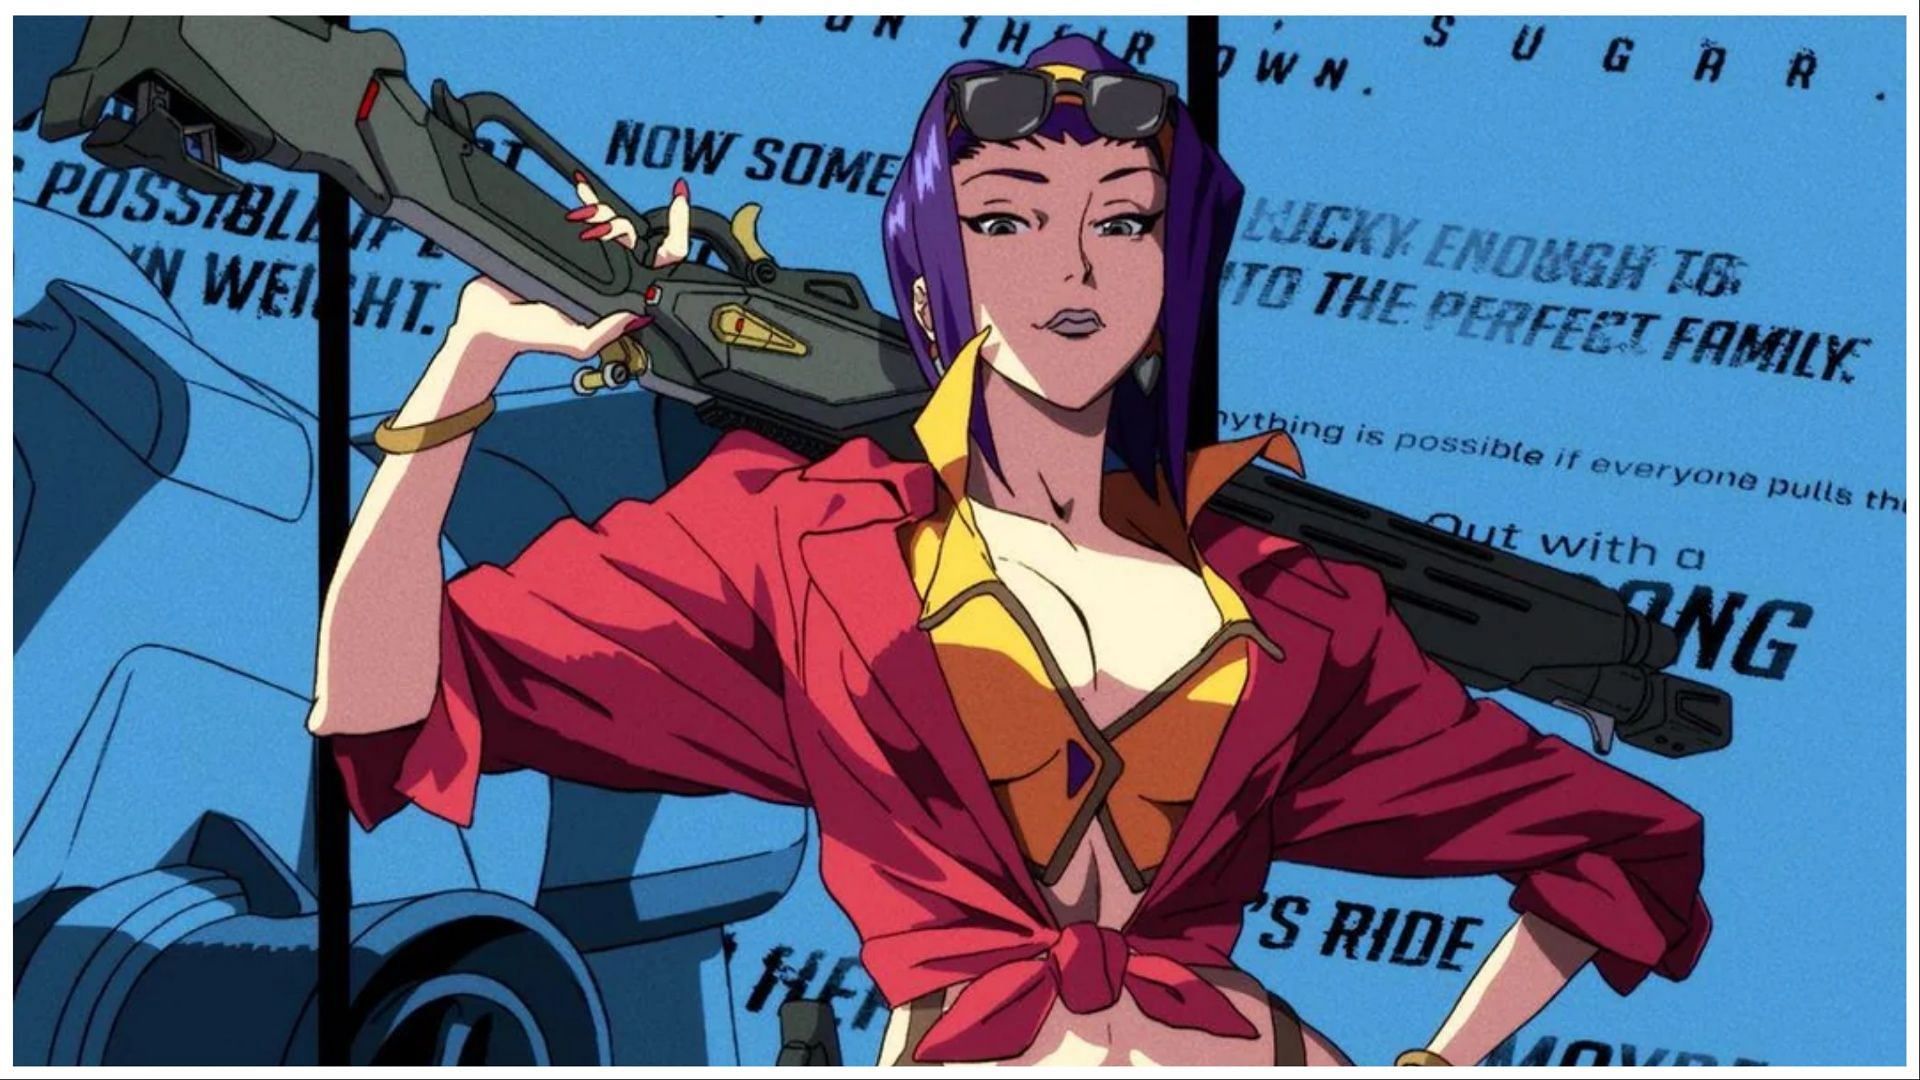 Faye Valentine skin for Ashe will be available in Overwatch 2 x Cowboy Bebop collaboration.